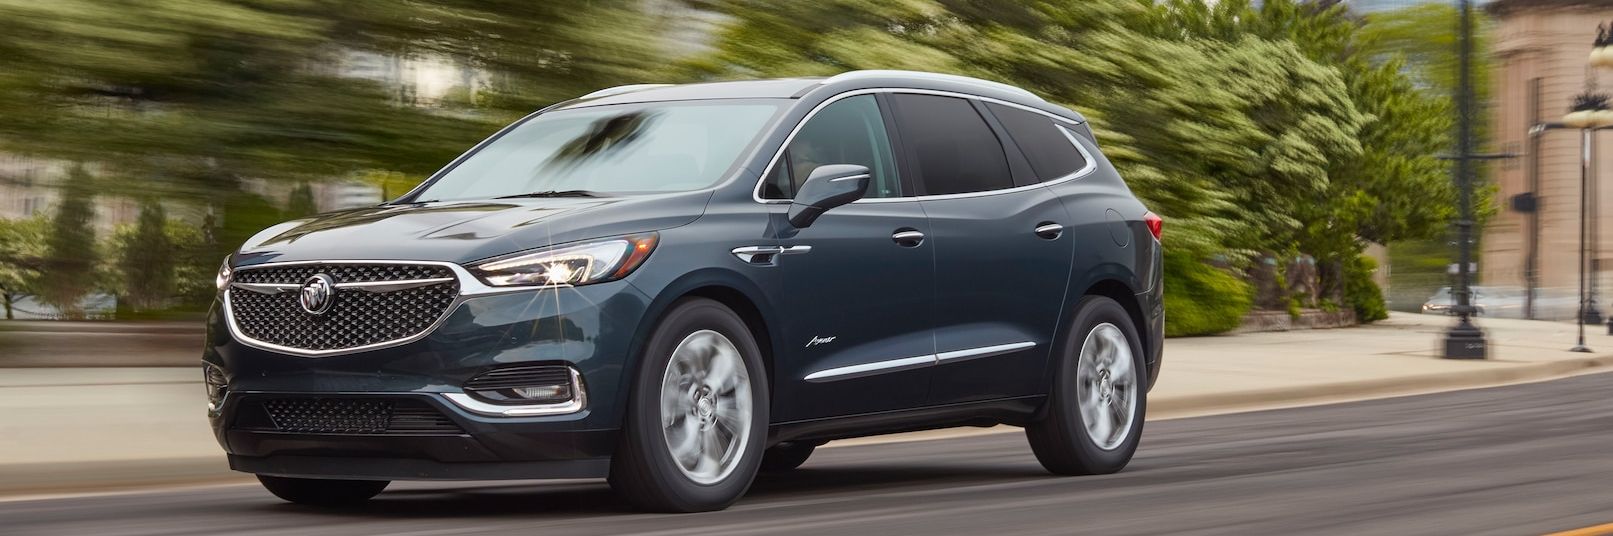 2018 buick enclave redesign